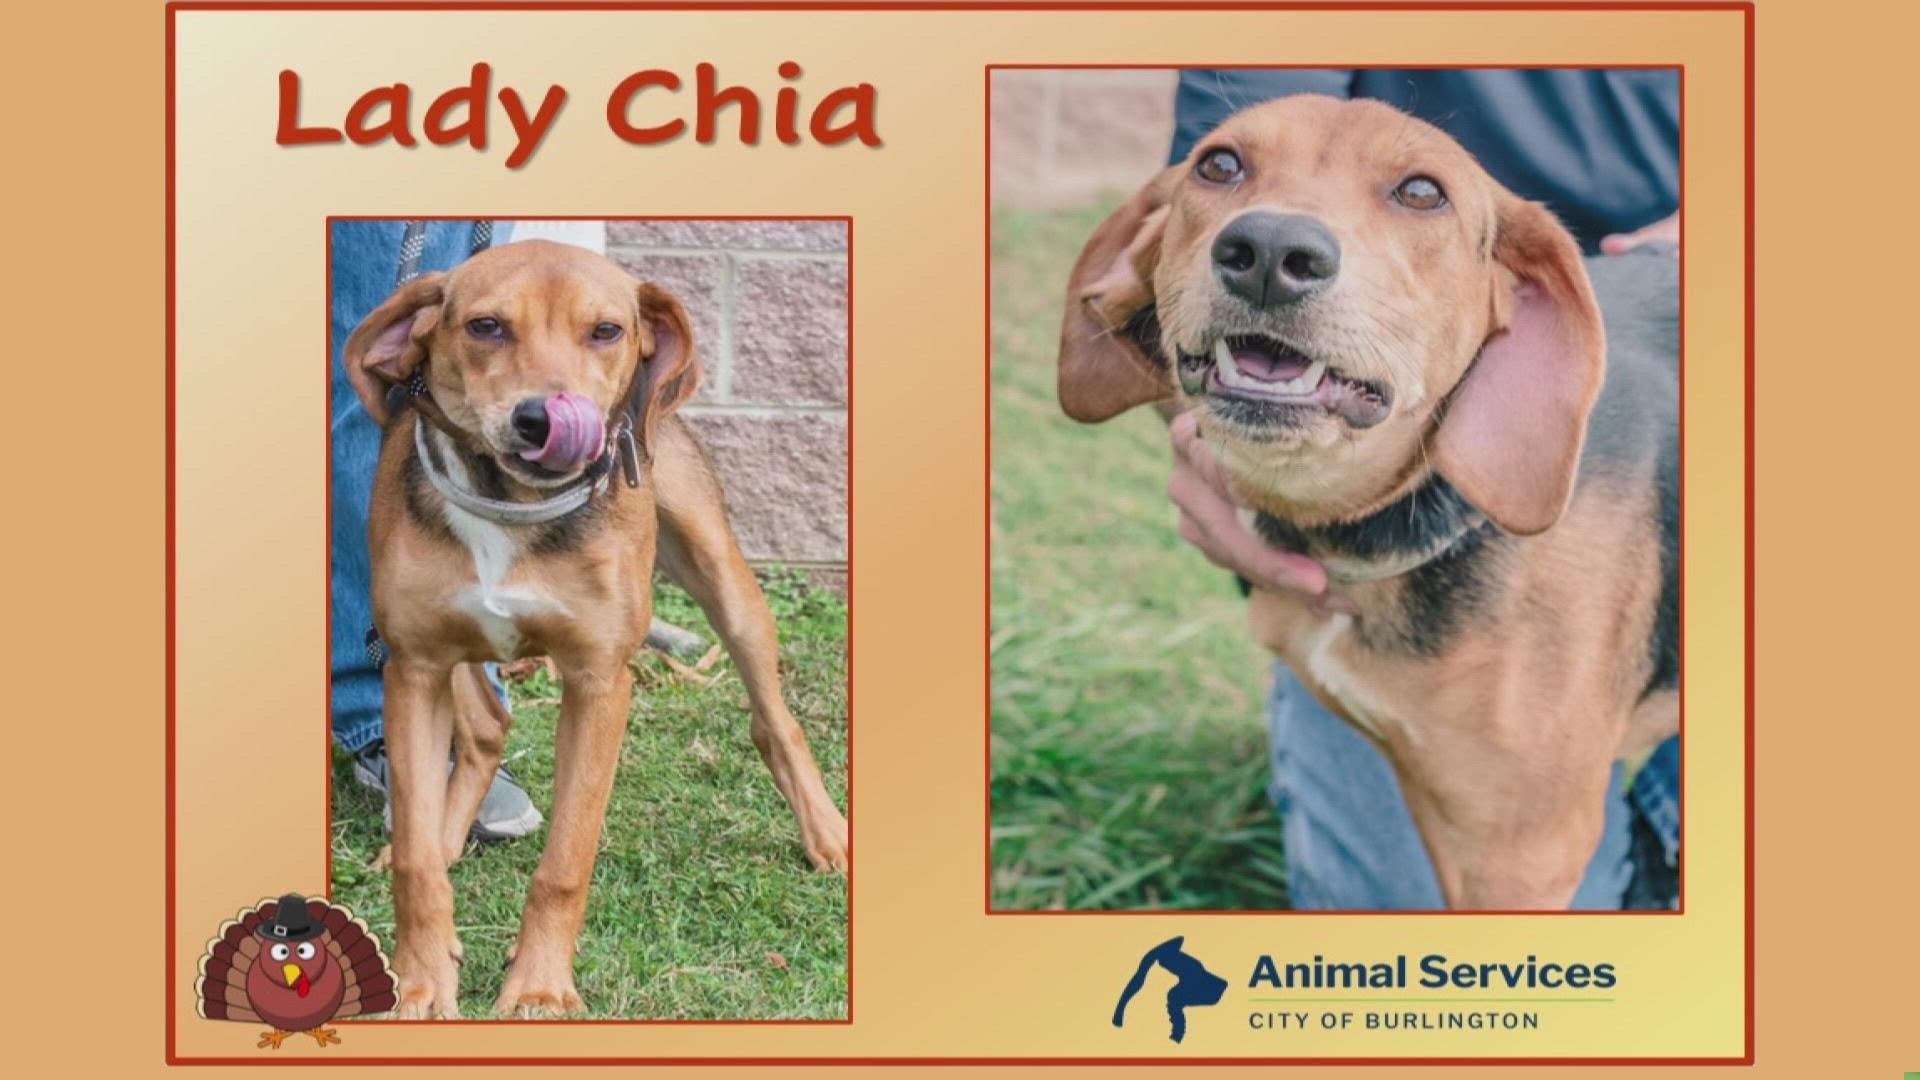 Let’s get Lady Chia adopted!